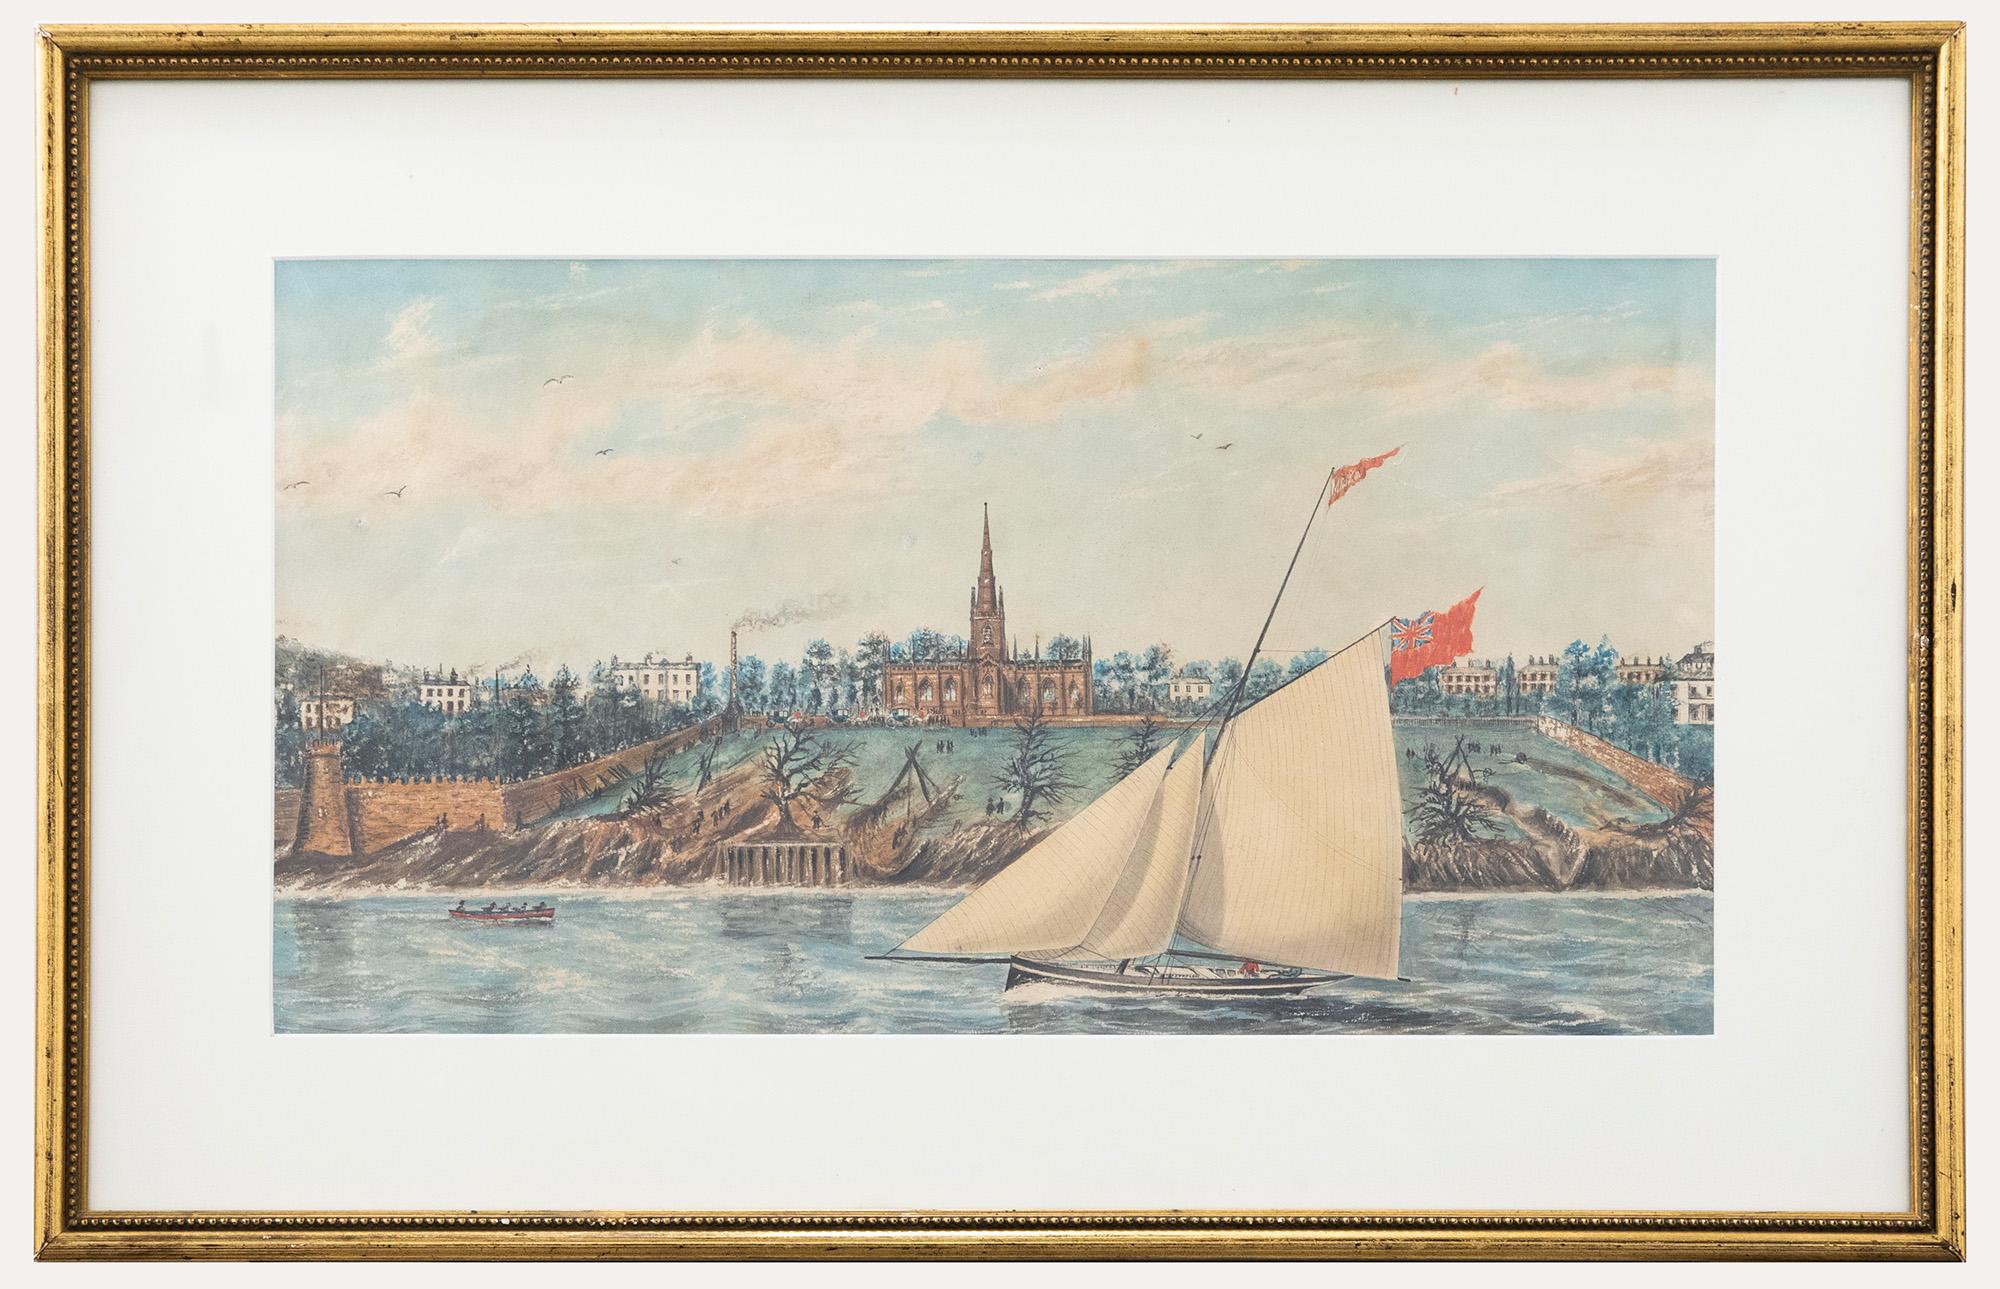 Unknown Landscape Art - Mid 19th Century Watercolour - Passing Yacht